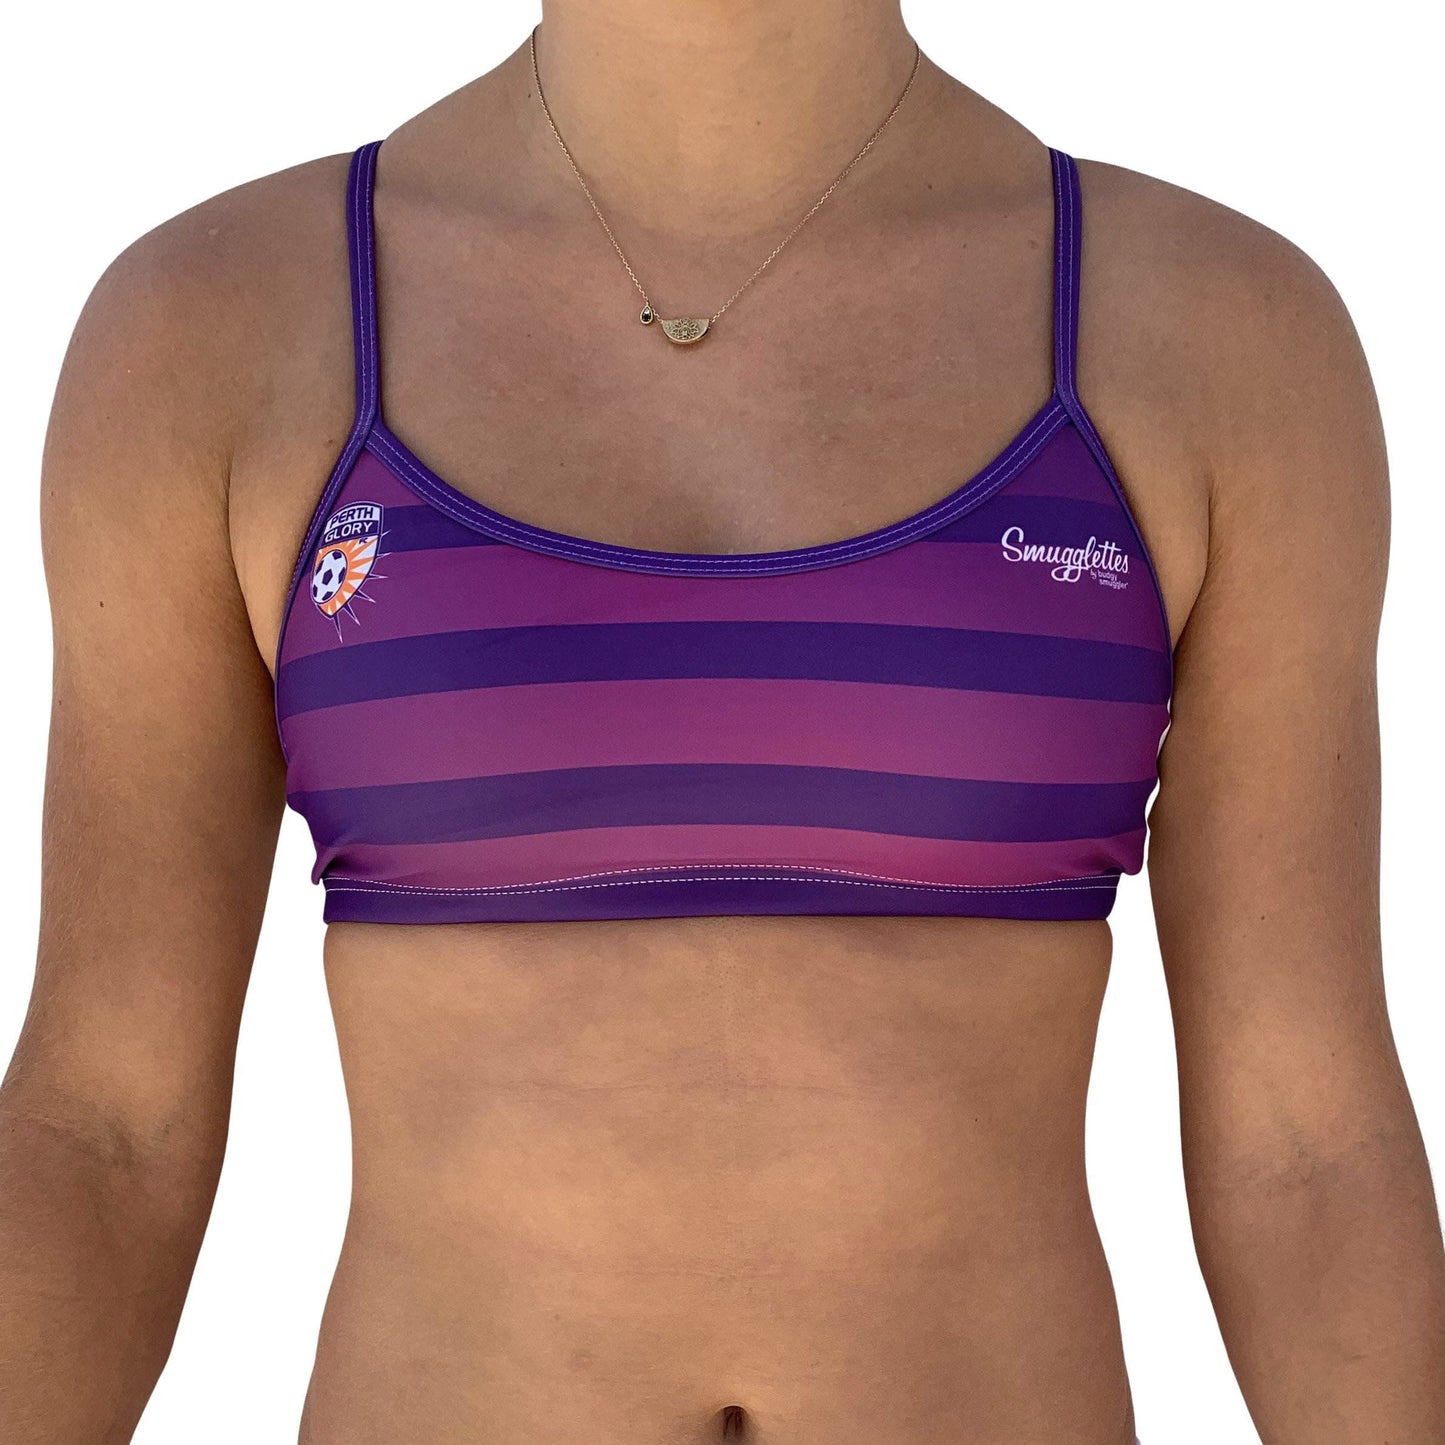 Freshwater Top in Perth Glory